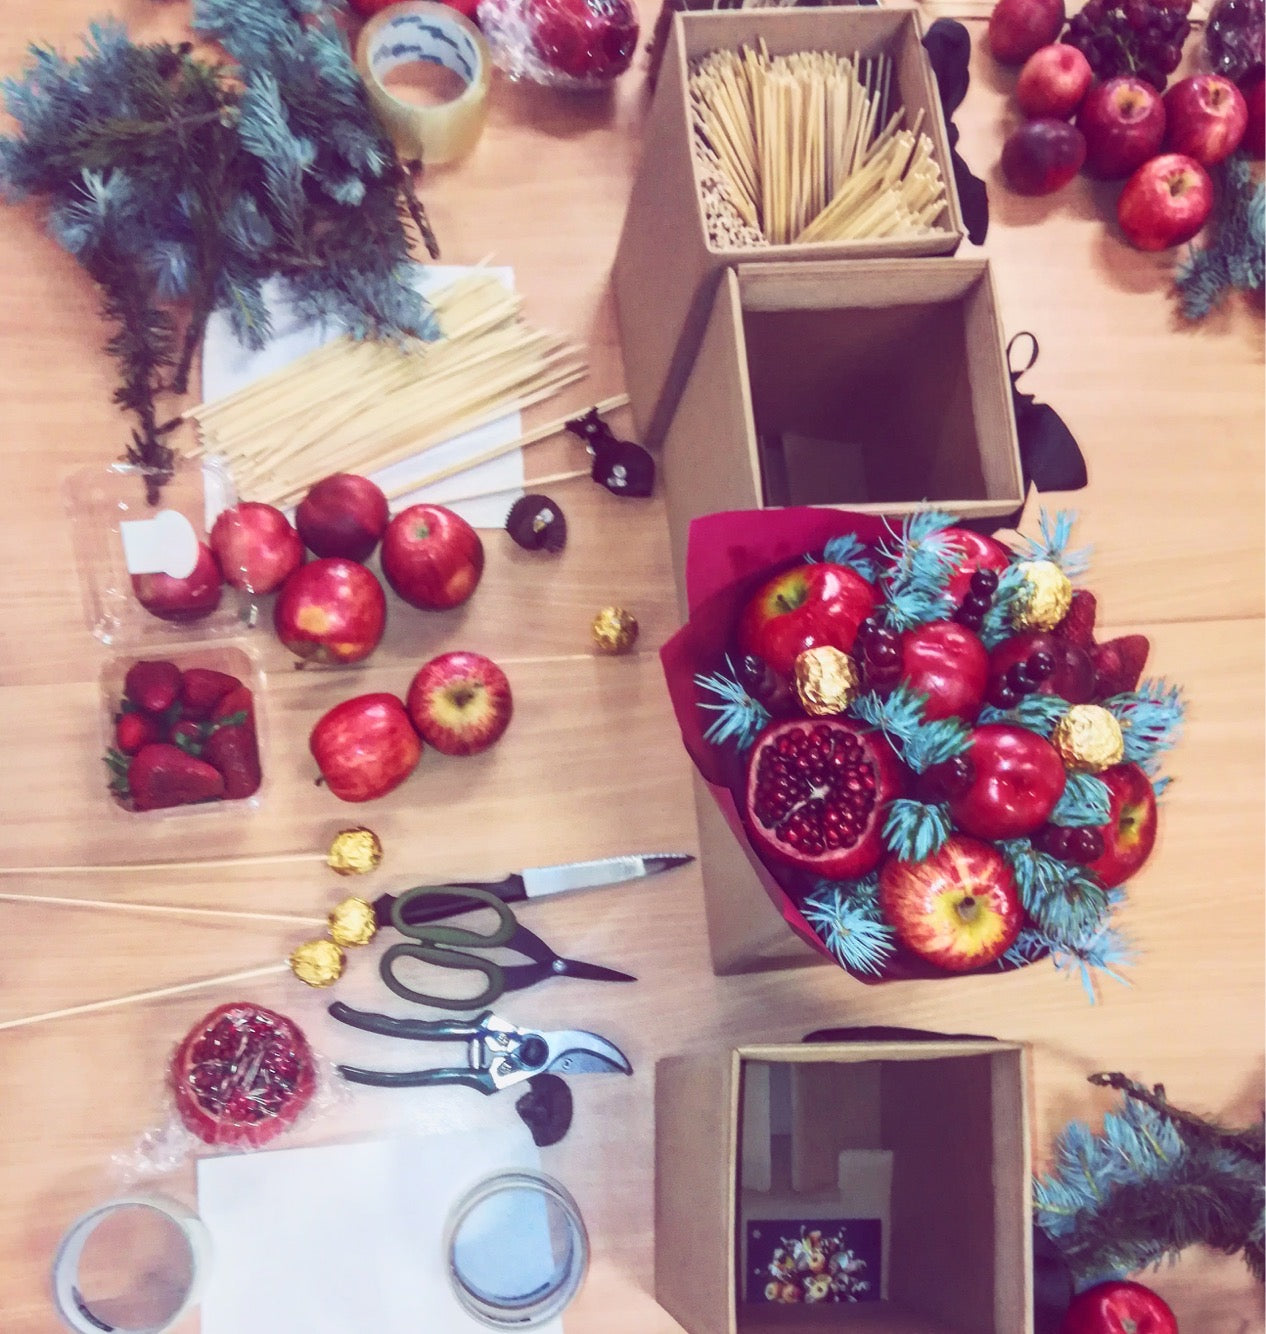 First ever workshop for adults making "Xmas Feast Bouquet"